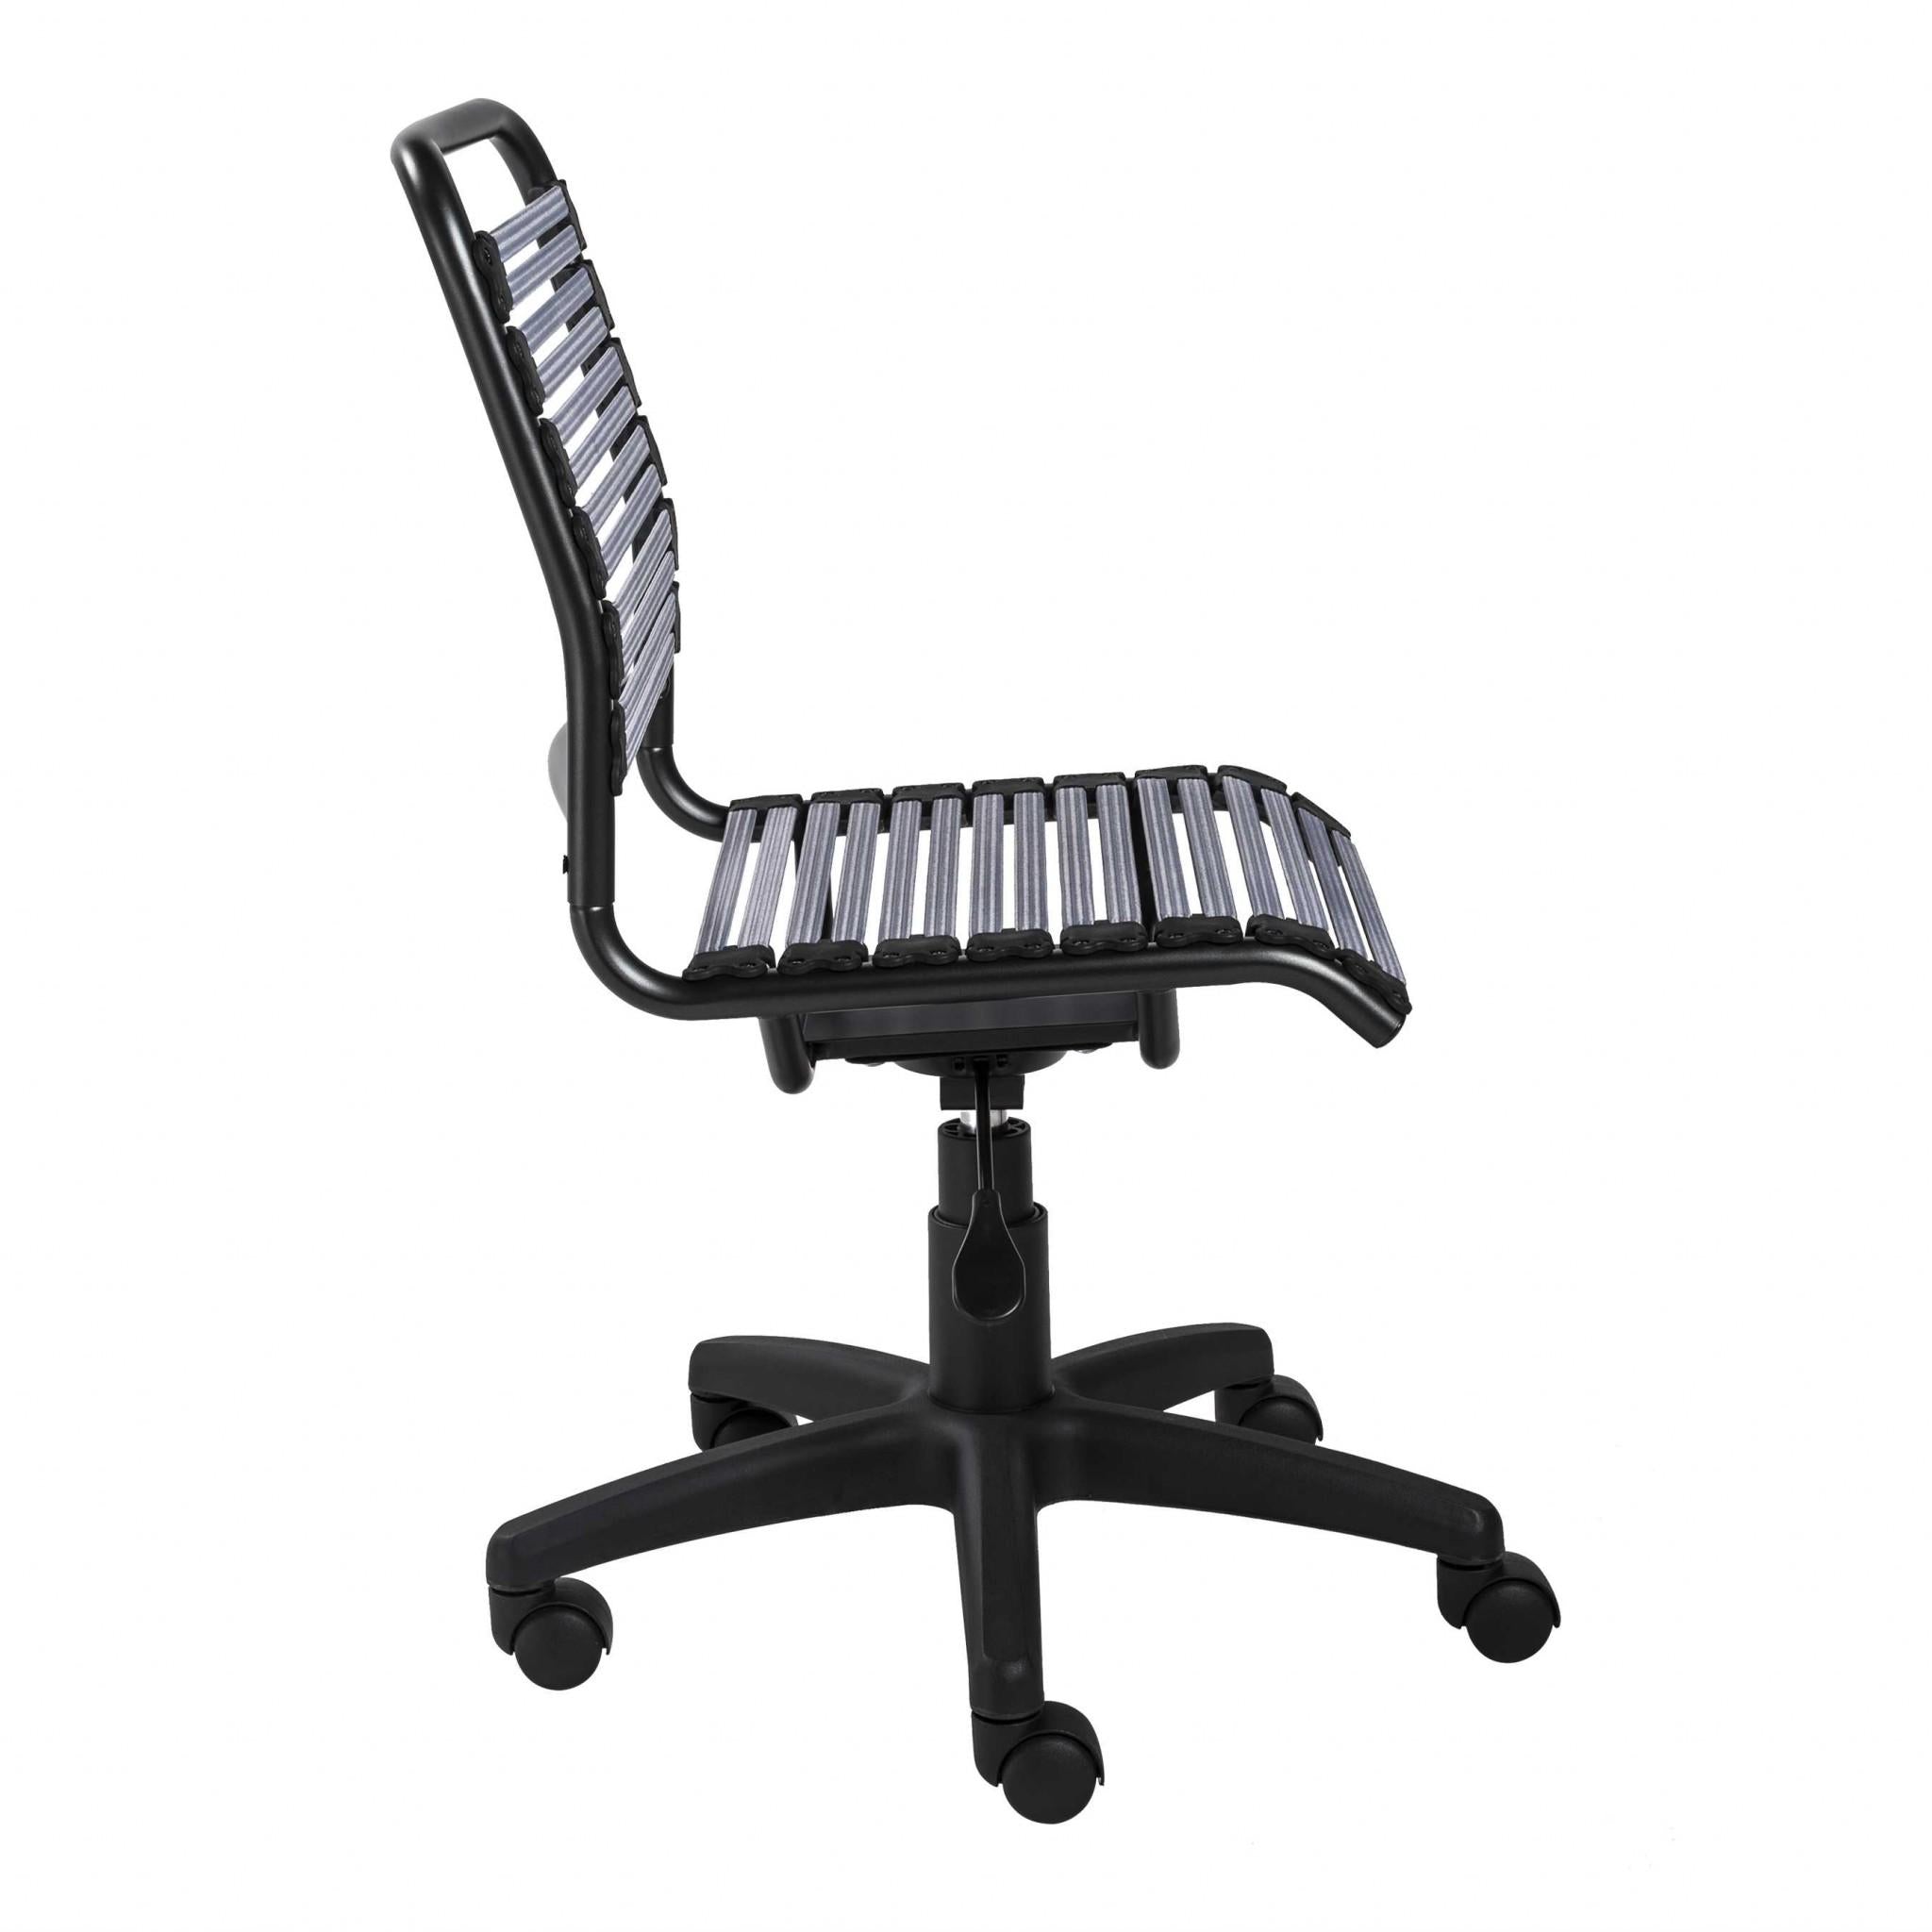 Gray Flat Bungie Cord Low Back Rolling Office Chair